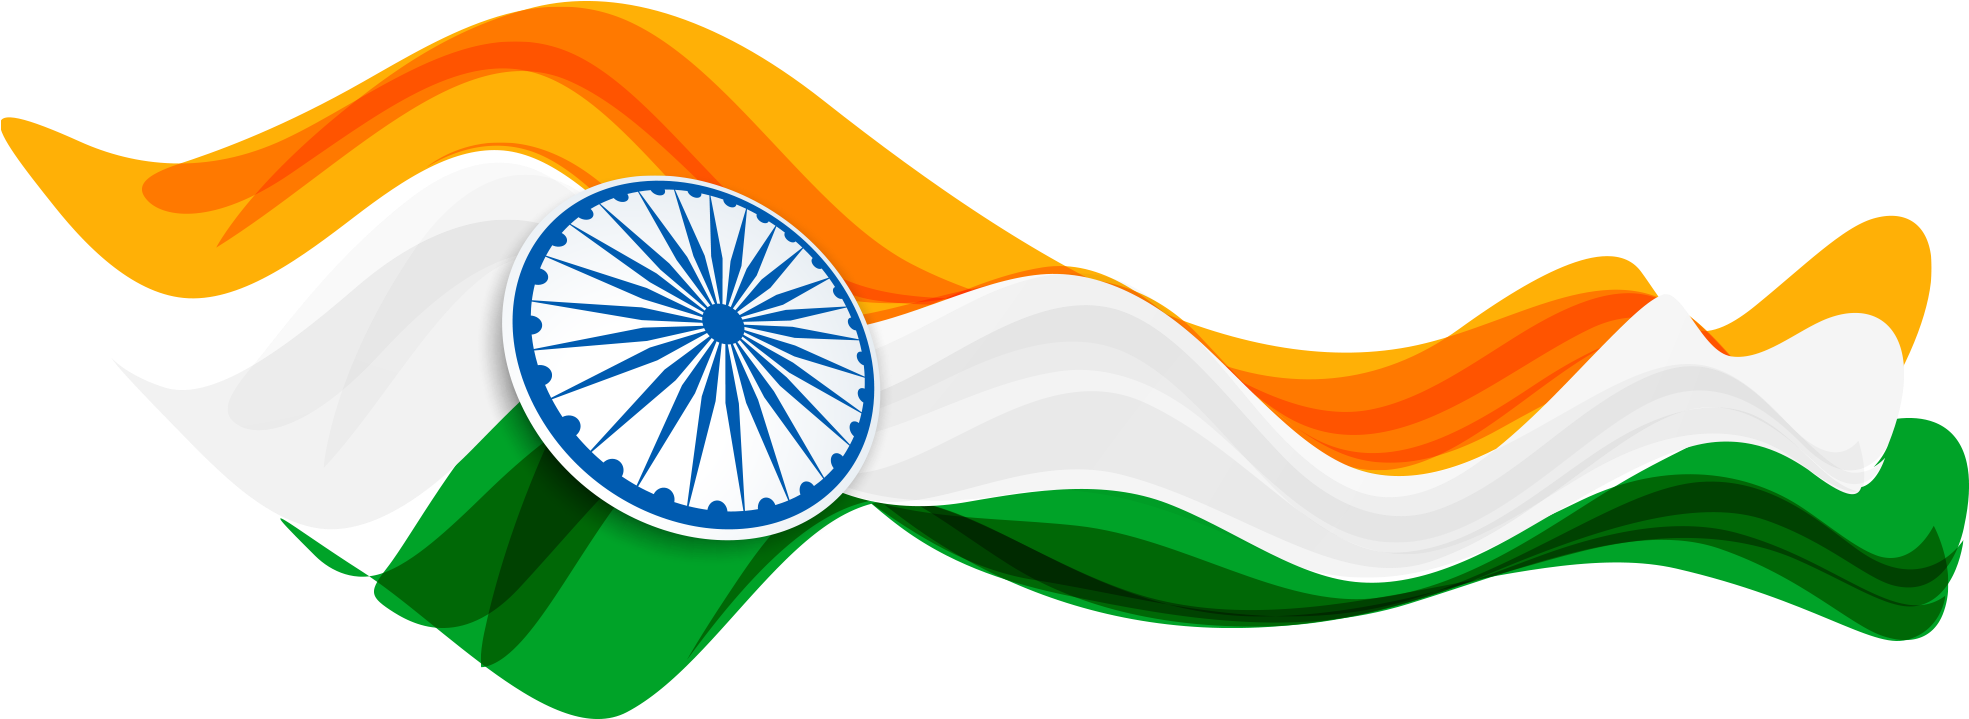 Download Unlimited Download - India Republic Day Png PNG Image with No  Background 